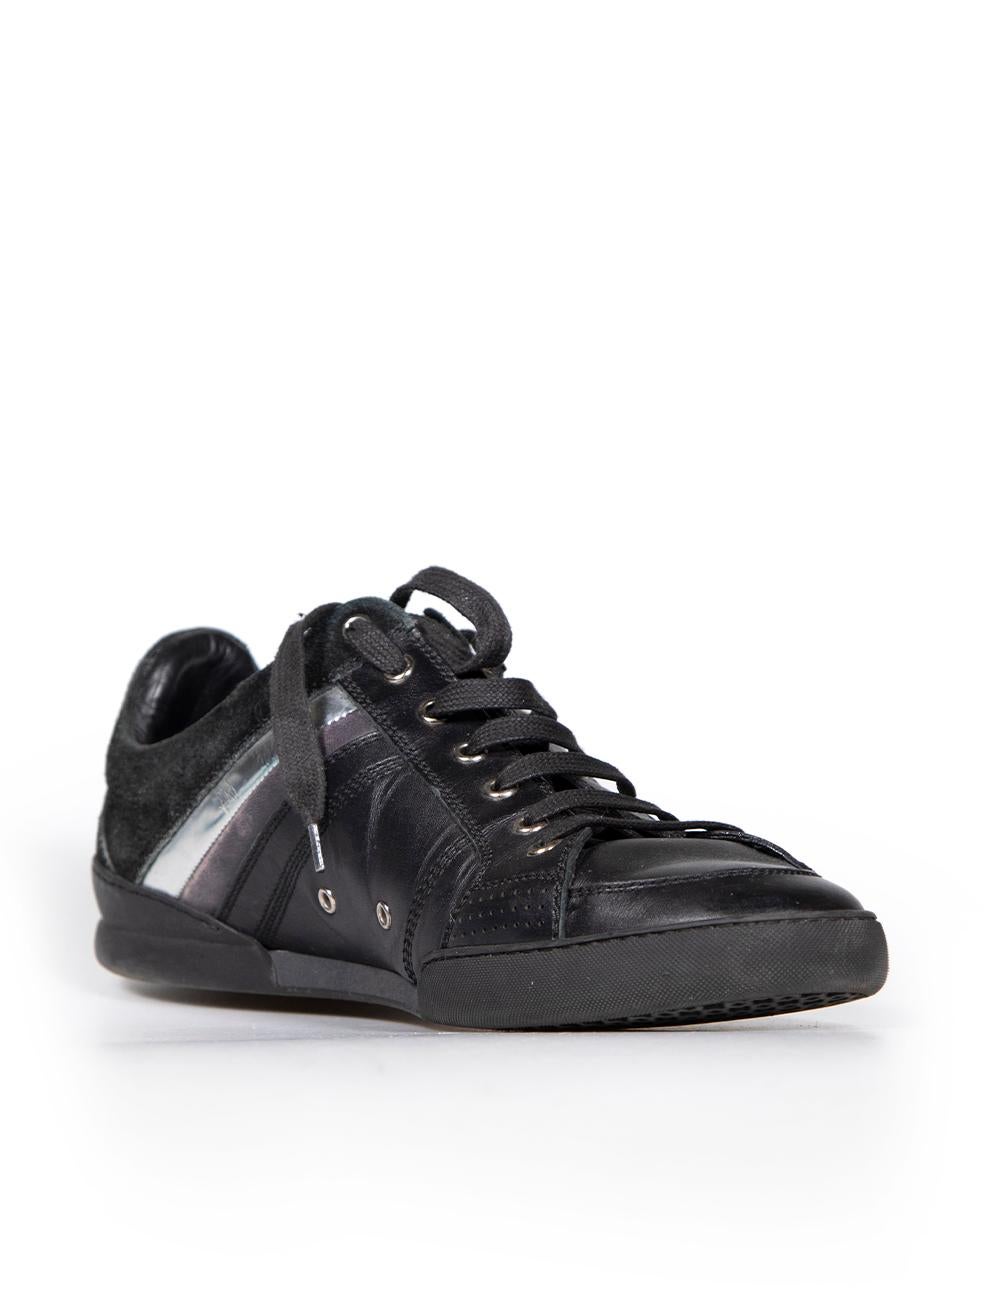 CONDITION is Good. Minor wear to trainers is evident. Light wear to silver panel where coating is coming off. Slight abrasion to navy leather stripe panel on this used Dior Homme designer resale item.
 
 
 
 Details
 
 
 Model: B18
 
 Black
 
